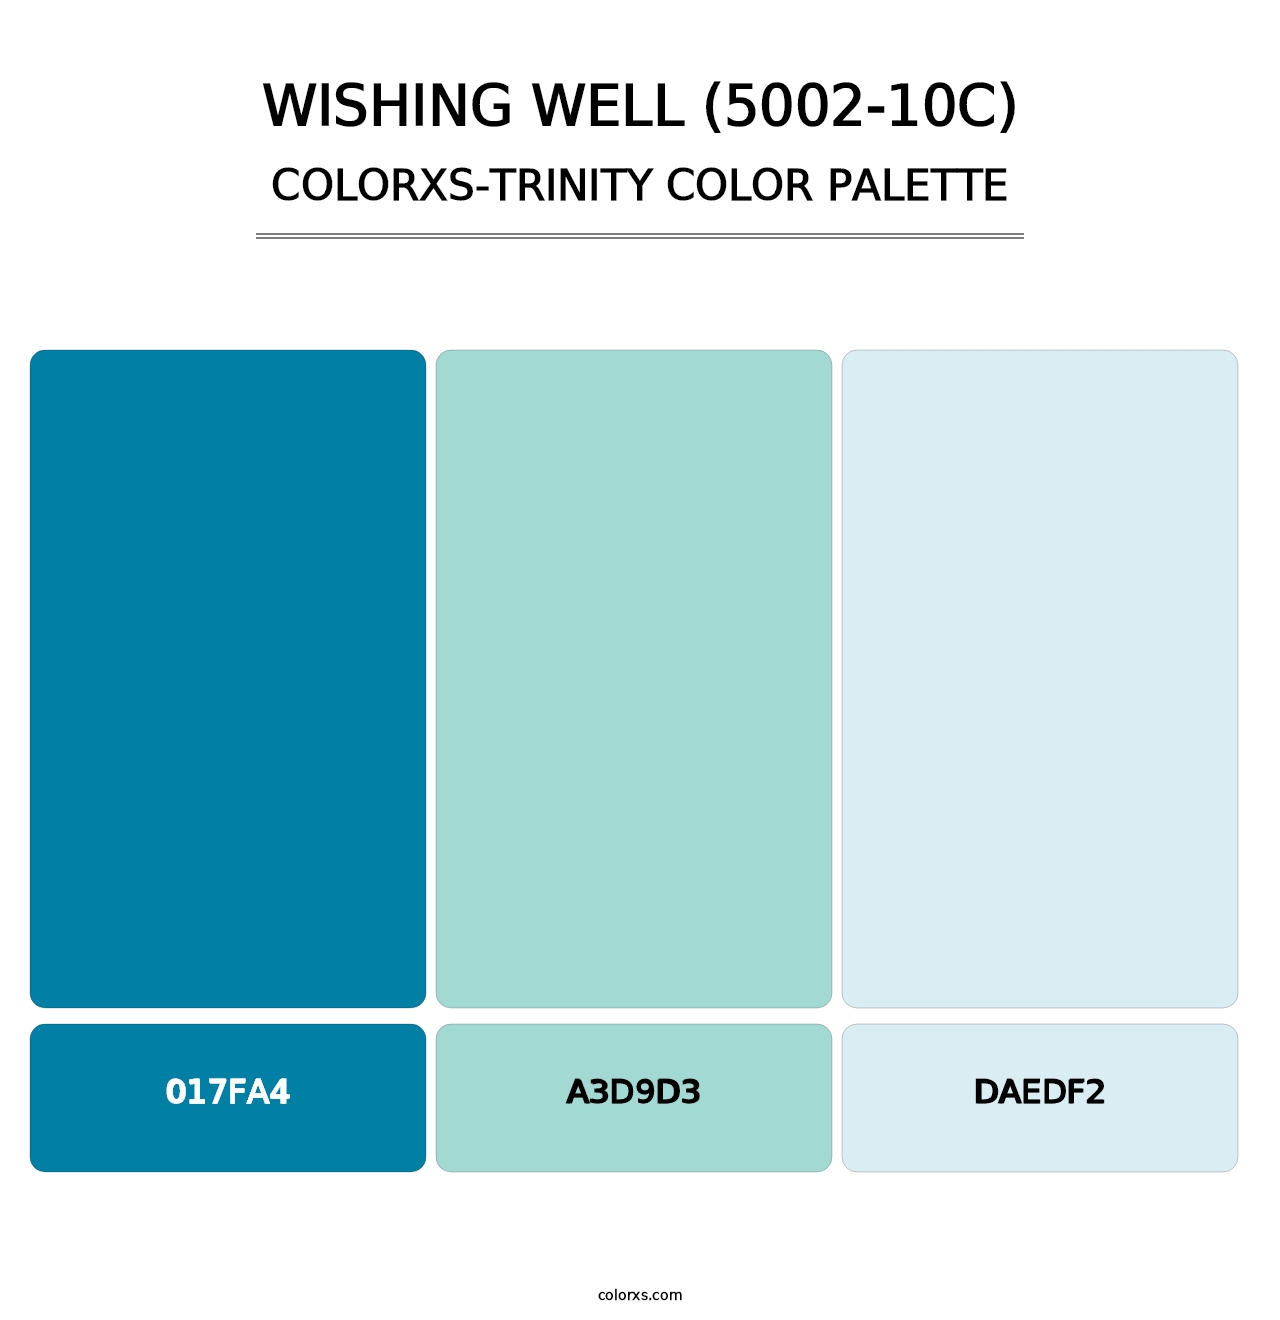 Wishing Well (5002-10C) - Colorxs Trinity Palette